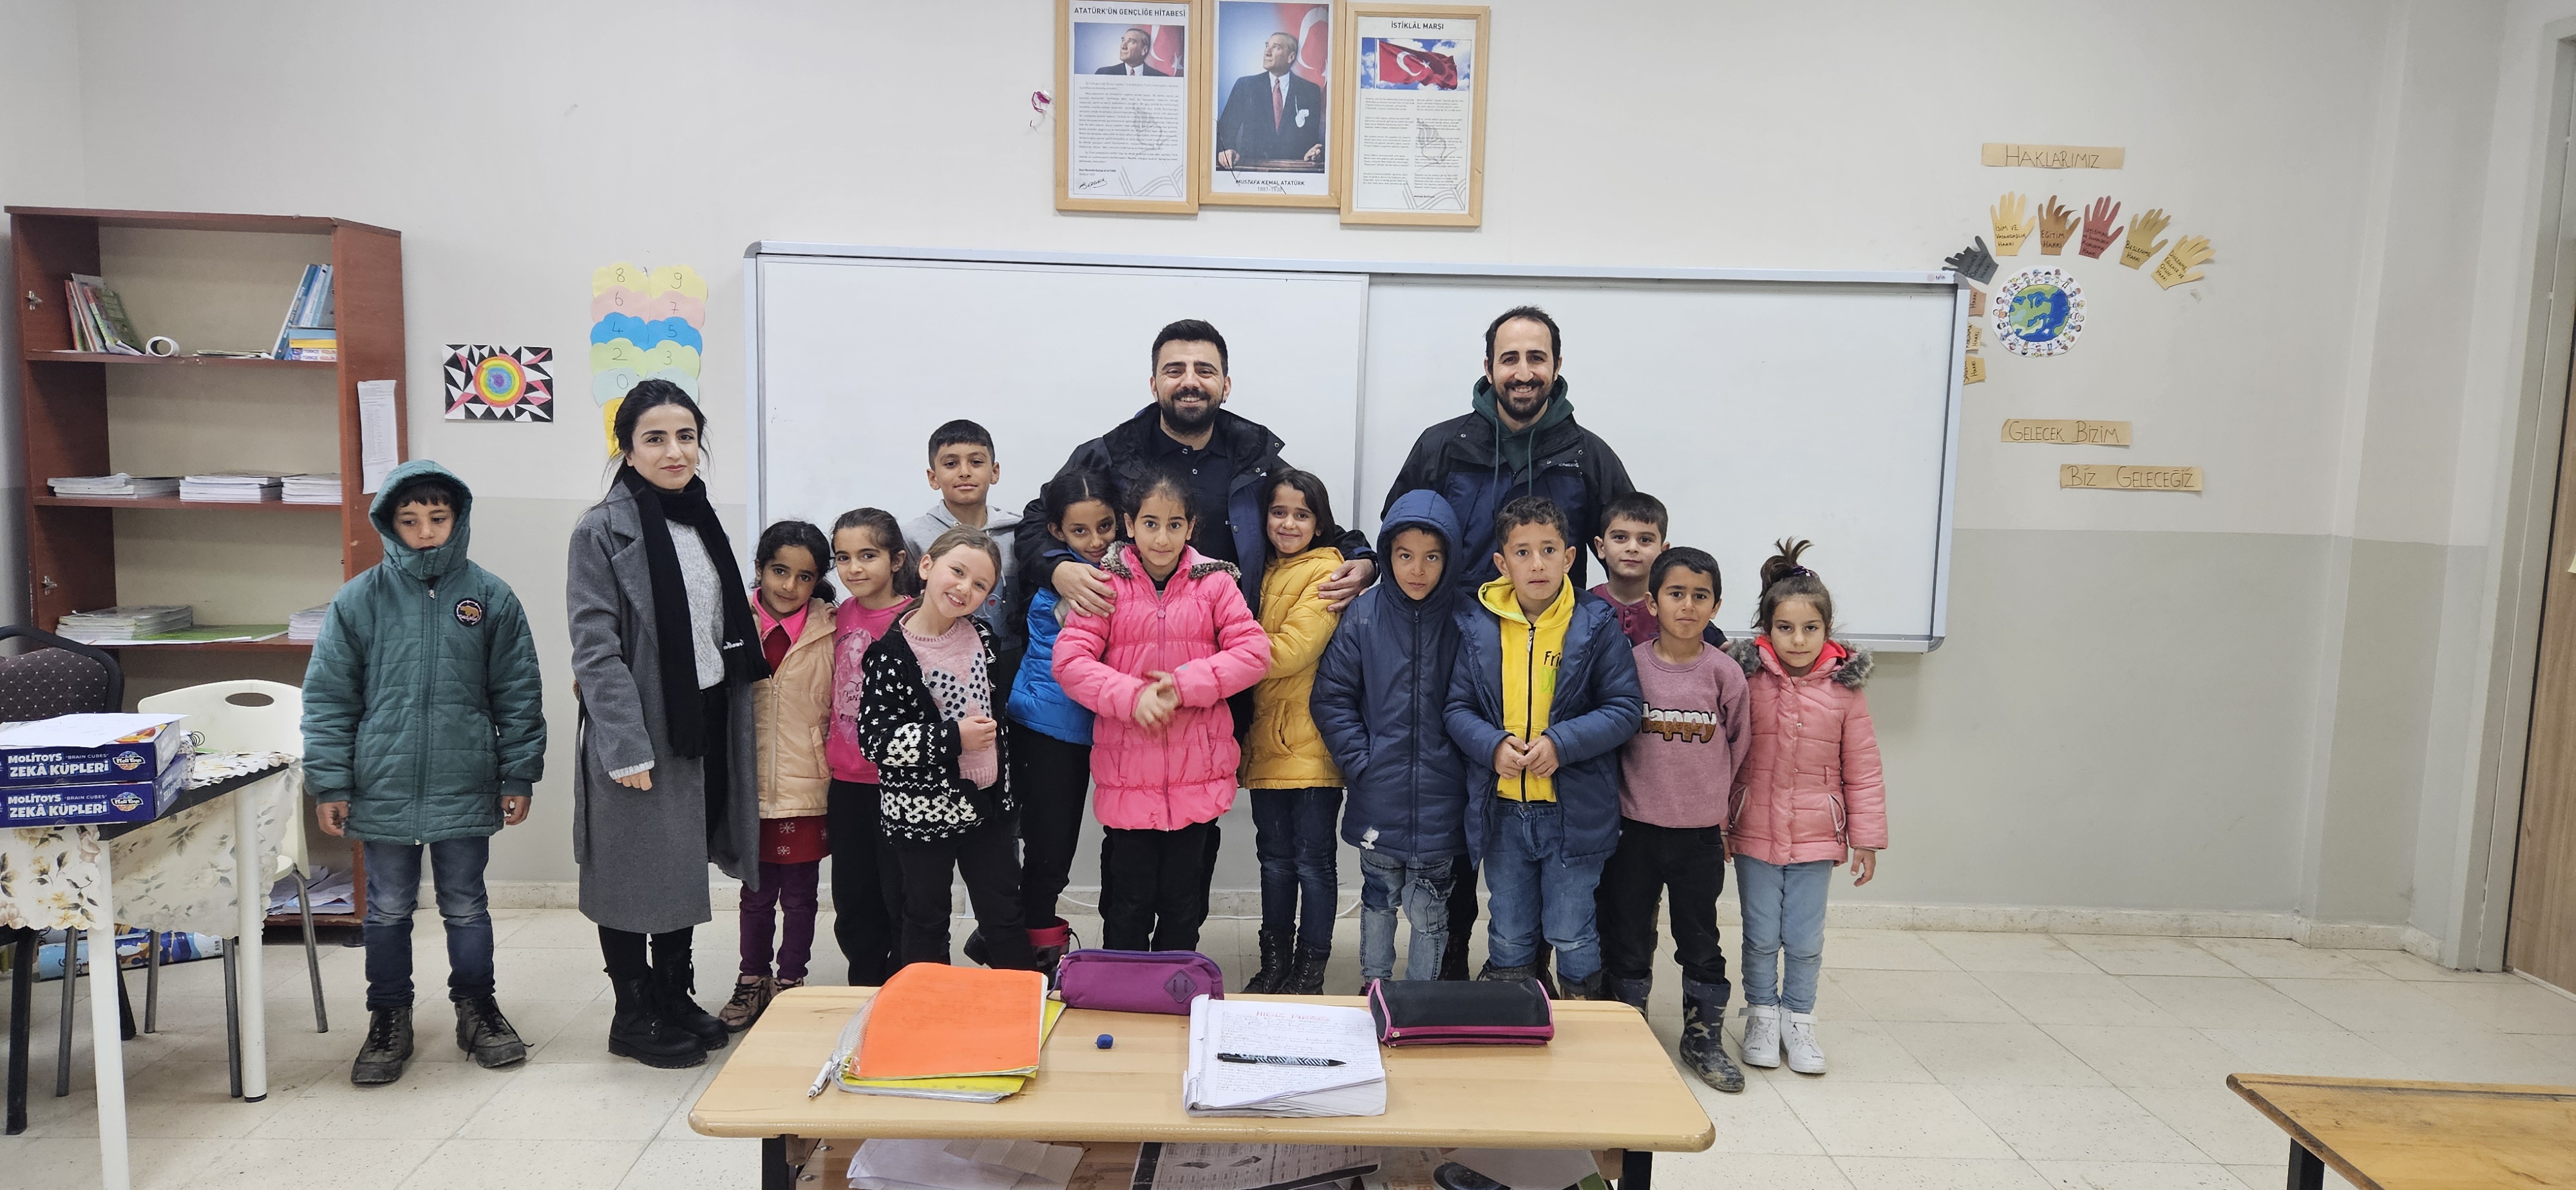 22 March World Water Day Poetry Competition Organized by Energo-Pro Türkiye in Village Schools in its Area of Influence